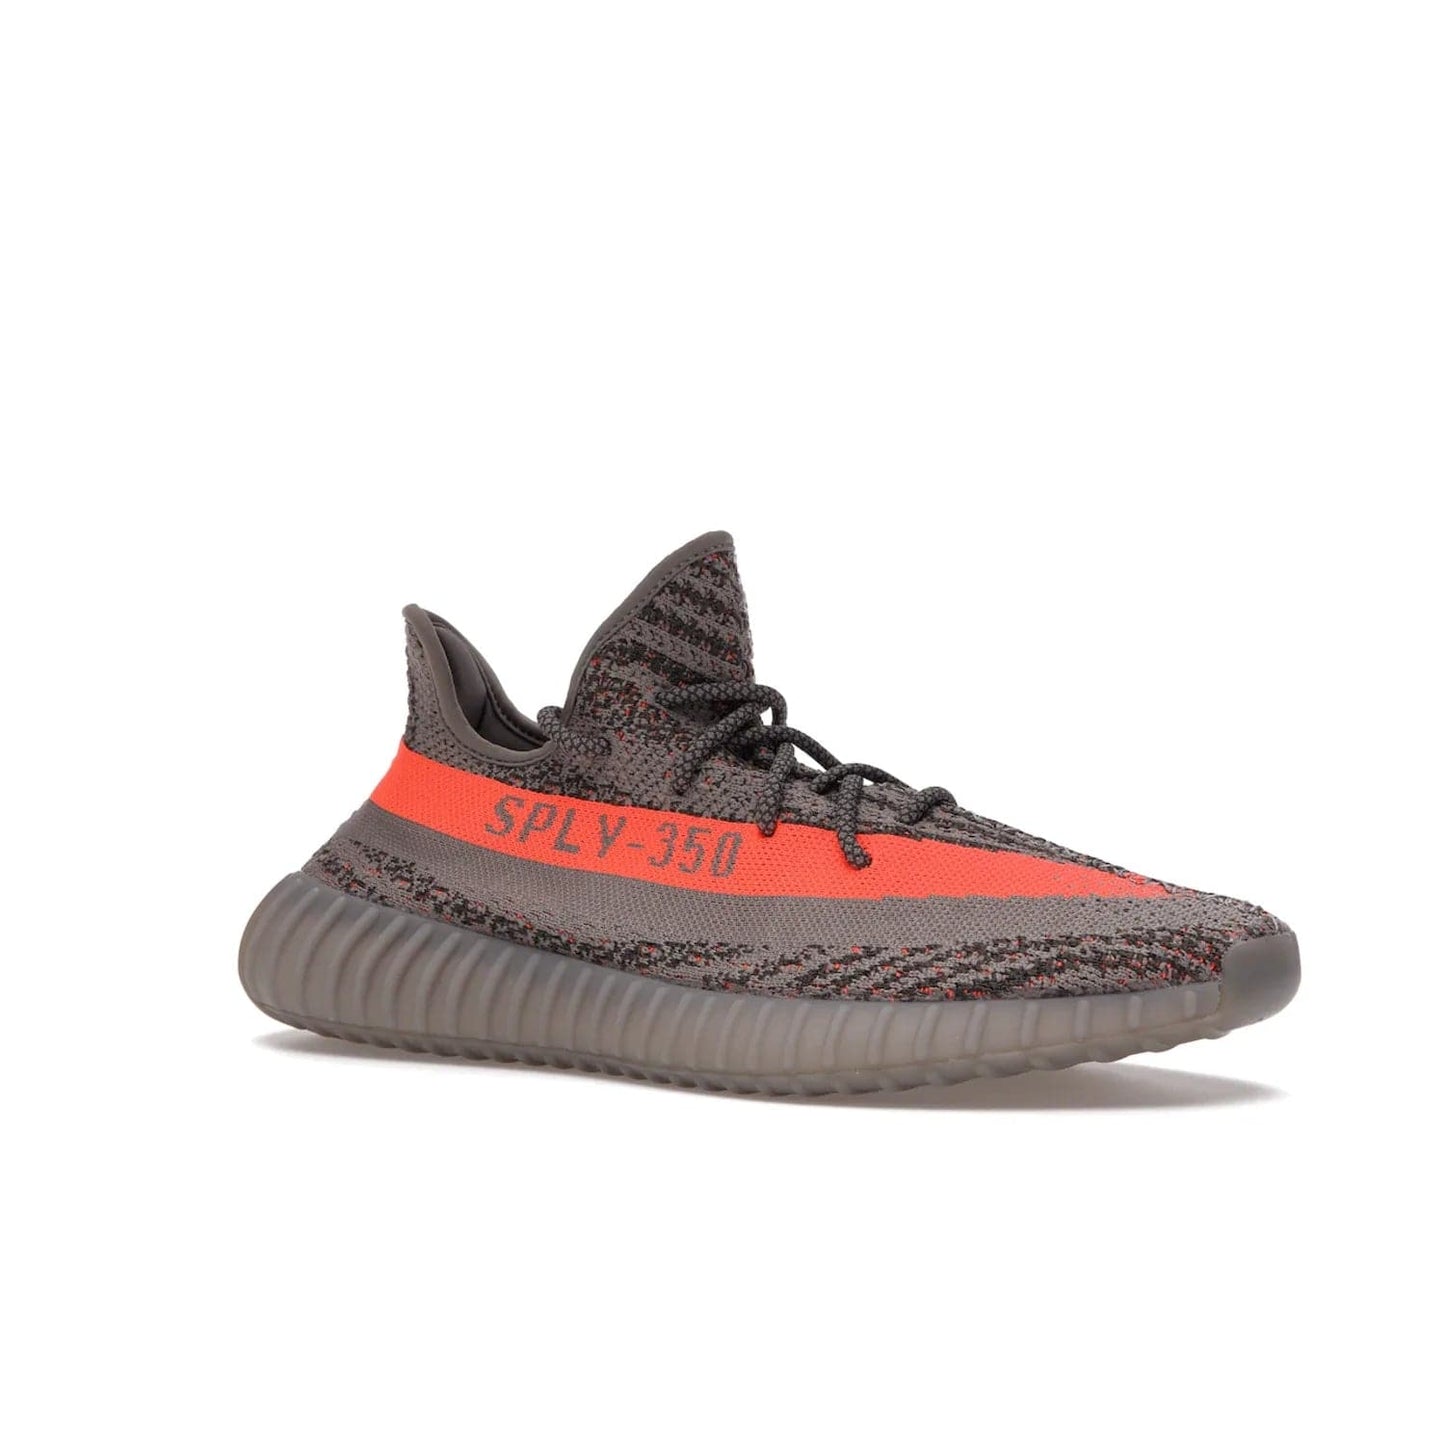 adidas Yeezy Boost 350 V2 Beluga Reflective - Image 4 - Only at www.BallersClubKickz.com - Shop the adidas Yeezy Boost 350 V2 Beluga Reflective: a stylish, reflective sneaker that stands out. Featuring Boost sole, Primeknit upper & signature orange stripe. Available Dec 2021.